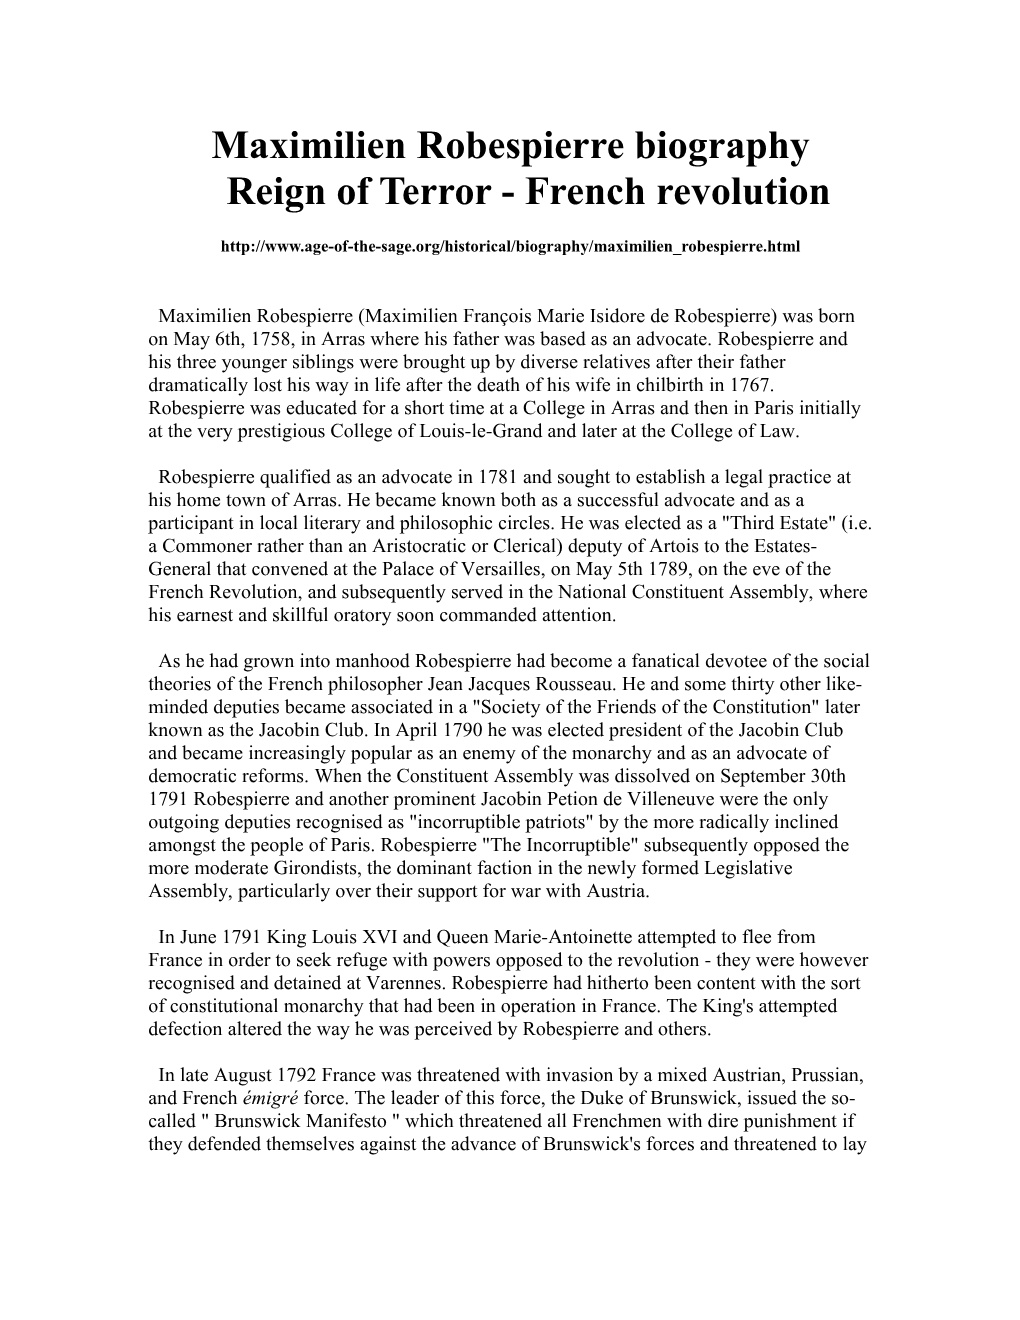 Maximilien Robespierre Biography